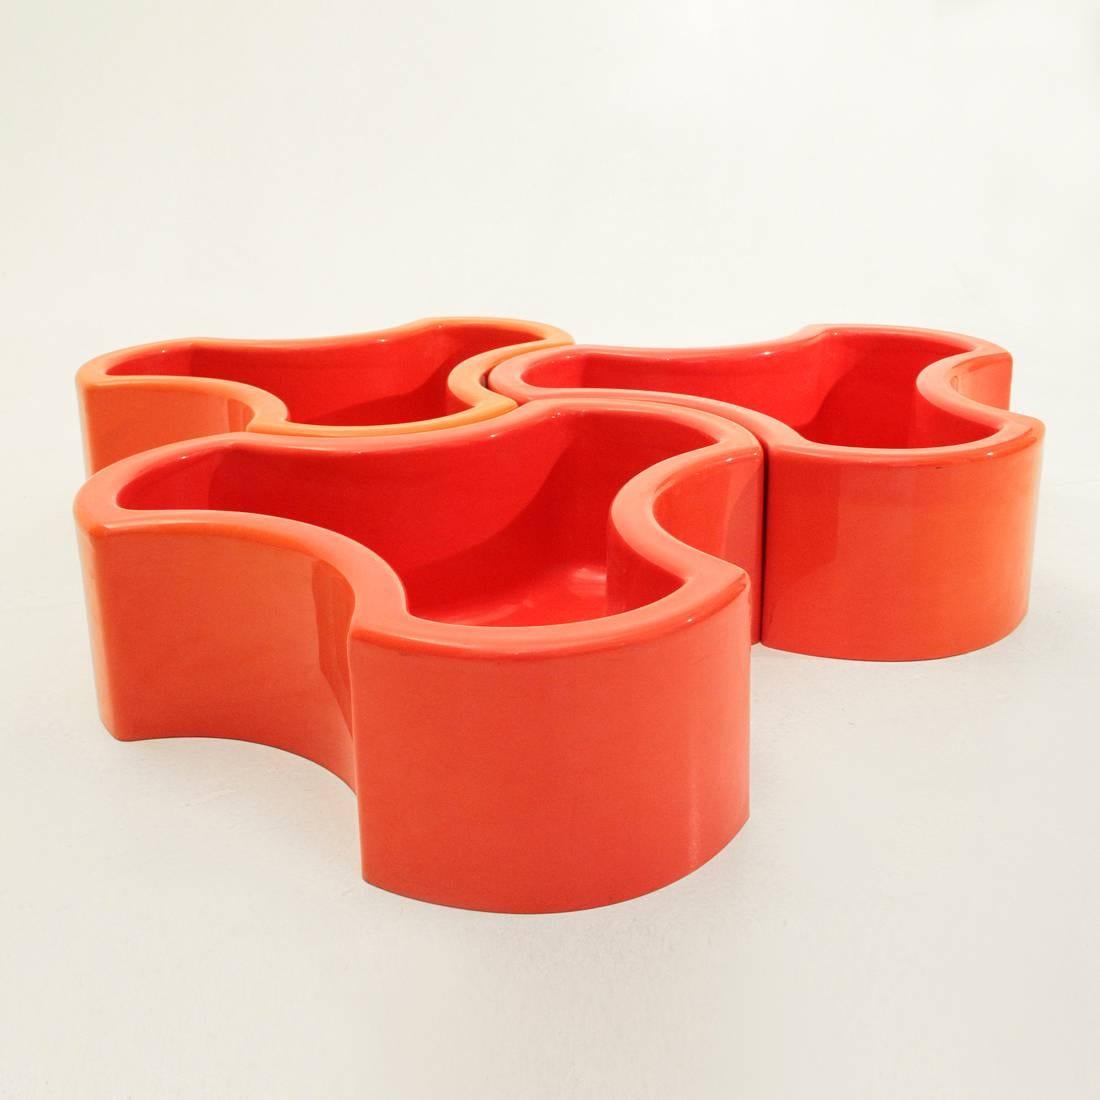 Seventies vase in red plastic.
Combined with each other in different compositions.
Two planters have small breakages.Some halos.

Dimensions: Width 65 cm - Depth 65 cm - Height 65 cm